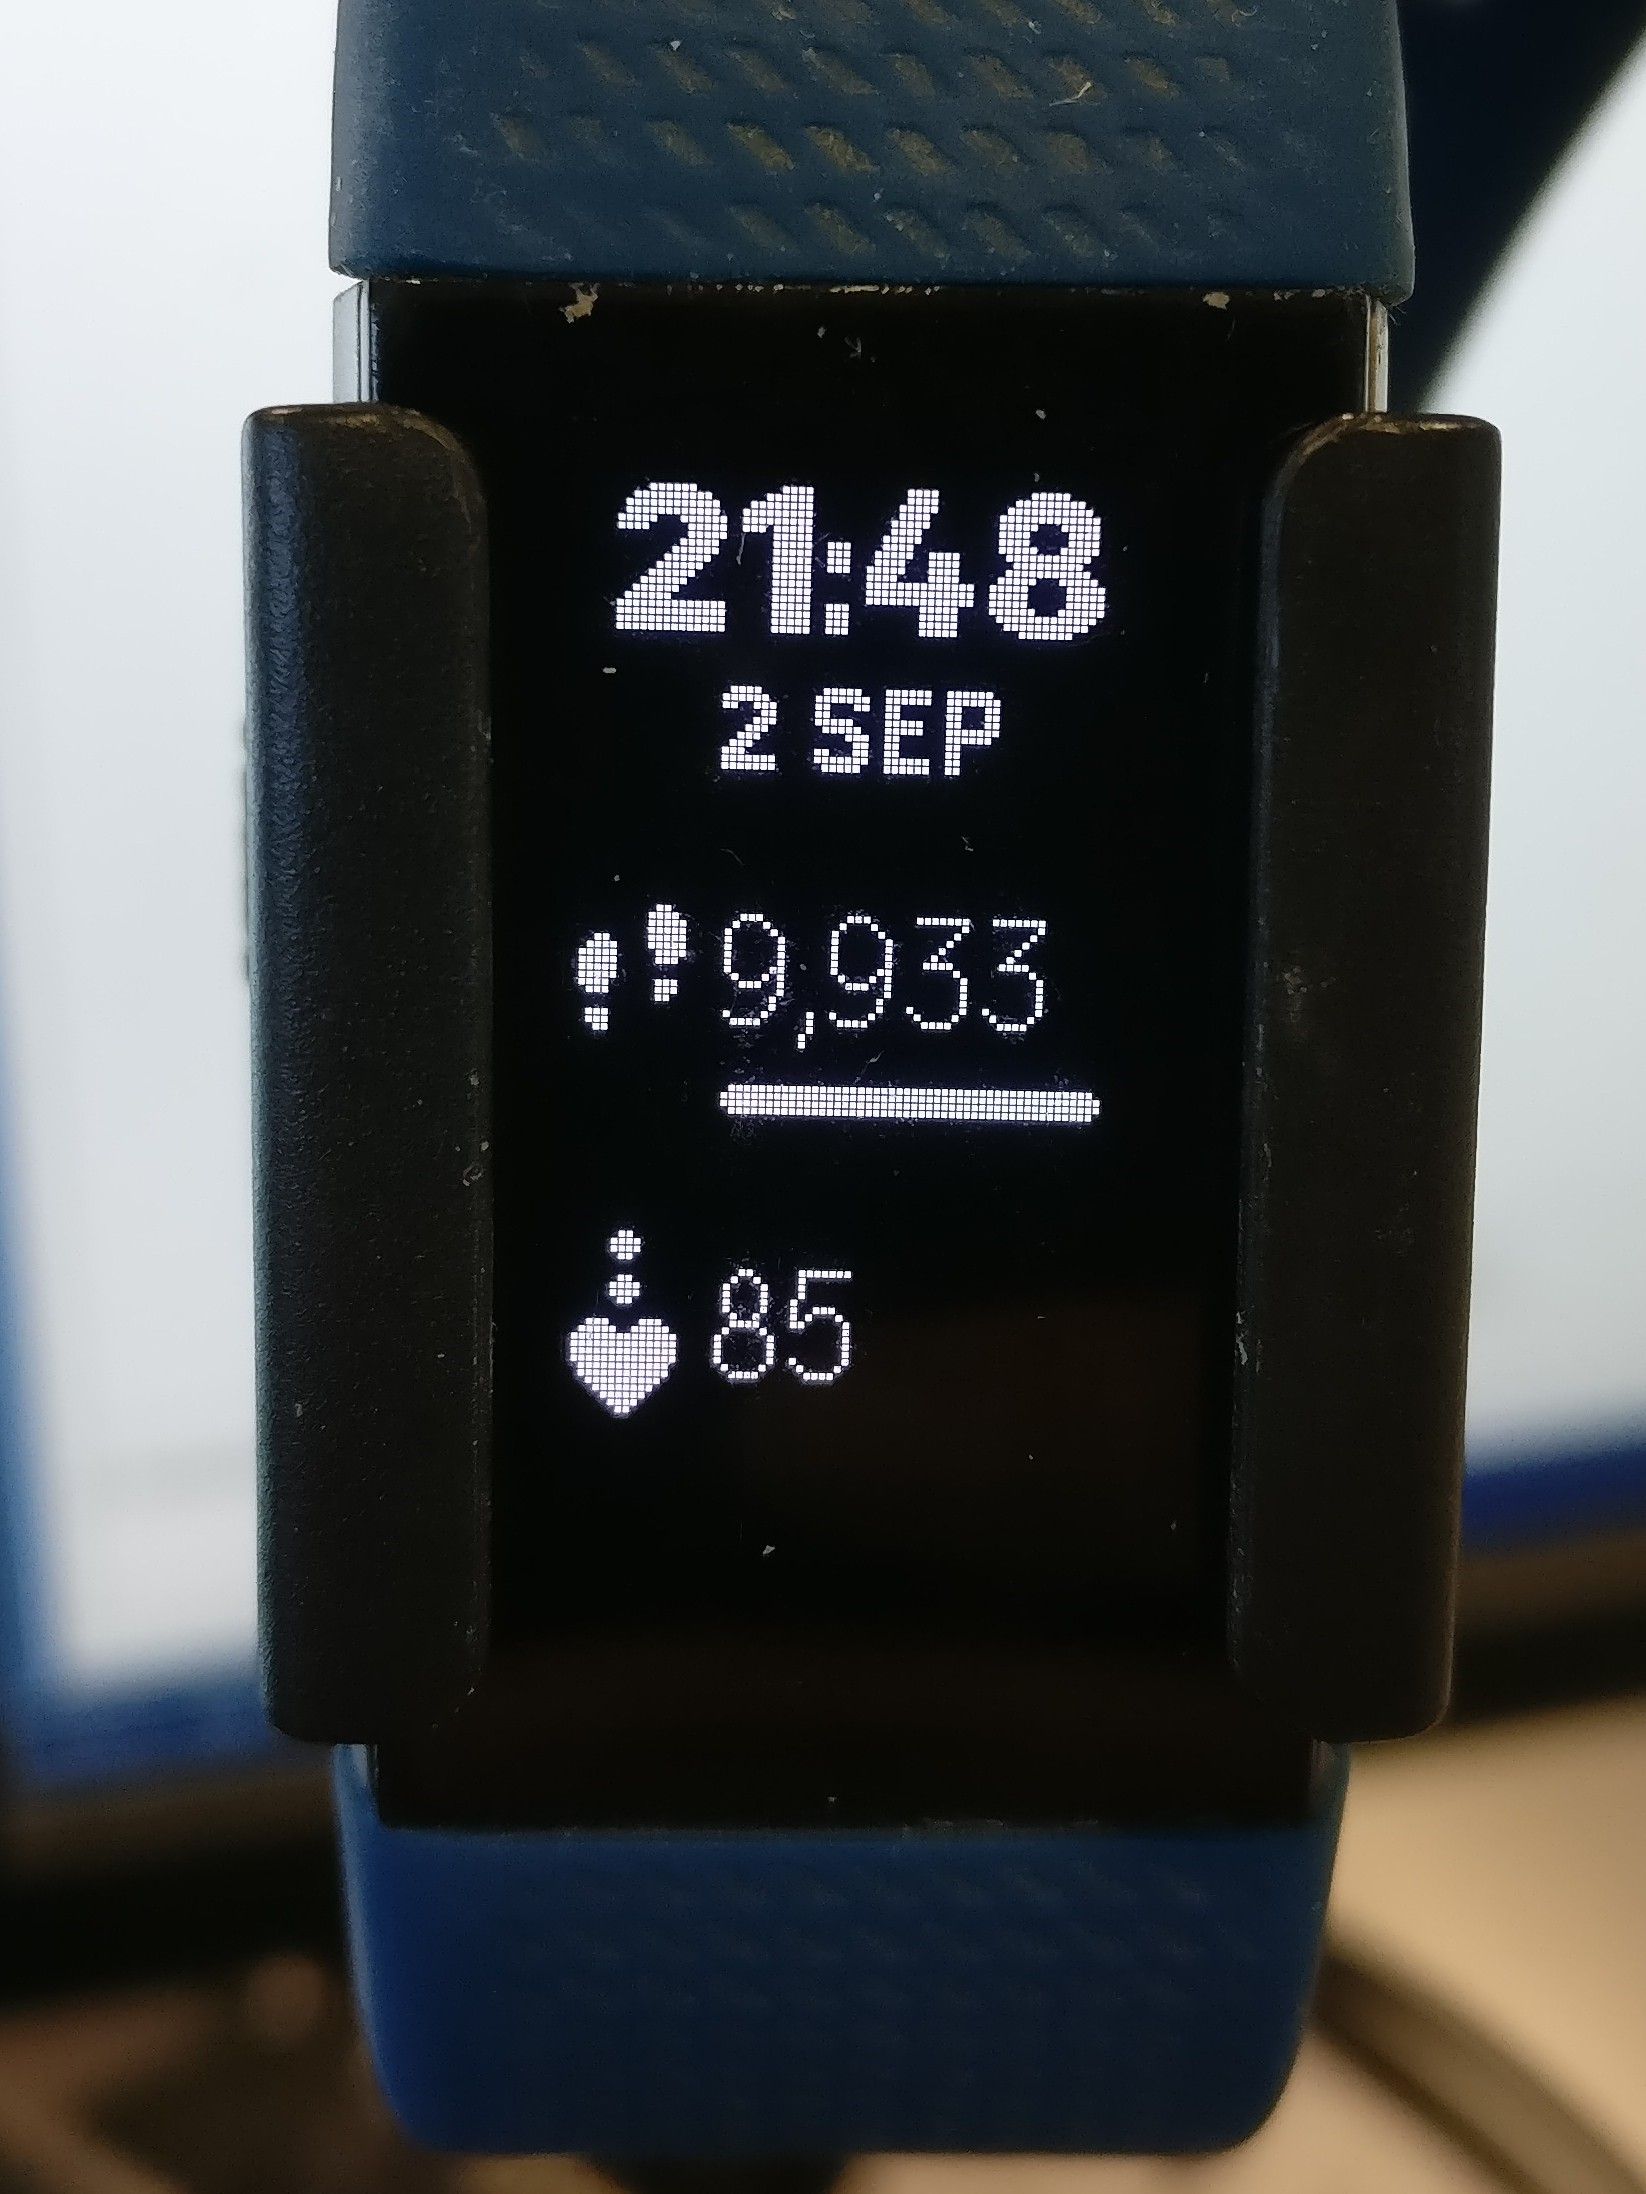 Charge 2's display is frozen - Fitbit 